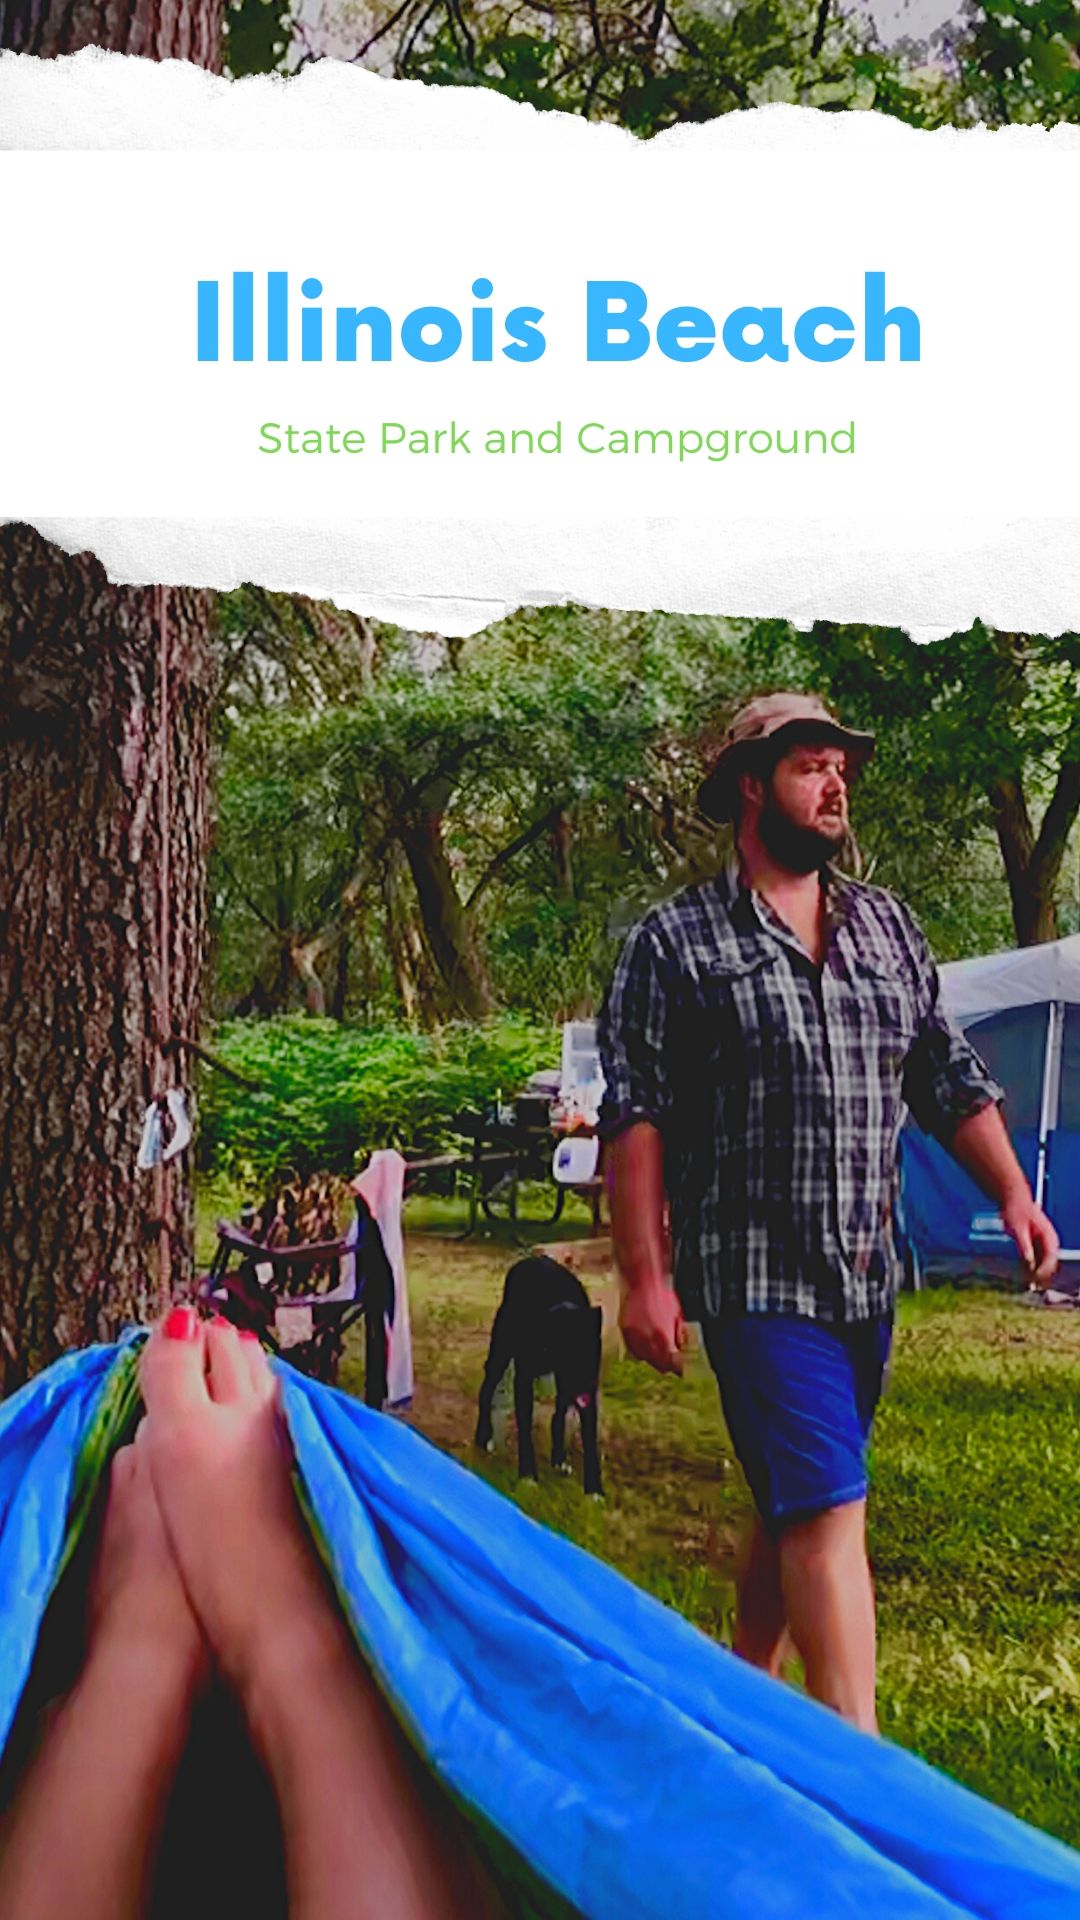 Illinois Beach State Park and Campground - Only an hour North of Chicago and South of Wisconsin -Sandy Lake Michigan Beach - Hiking & Fishing -Pet Friendly #campstateparks #illinoisbeachstatepark #travelIllinois #illinoiscamping